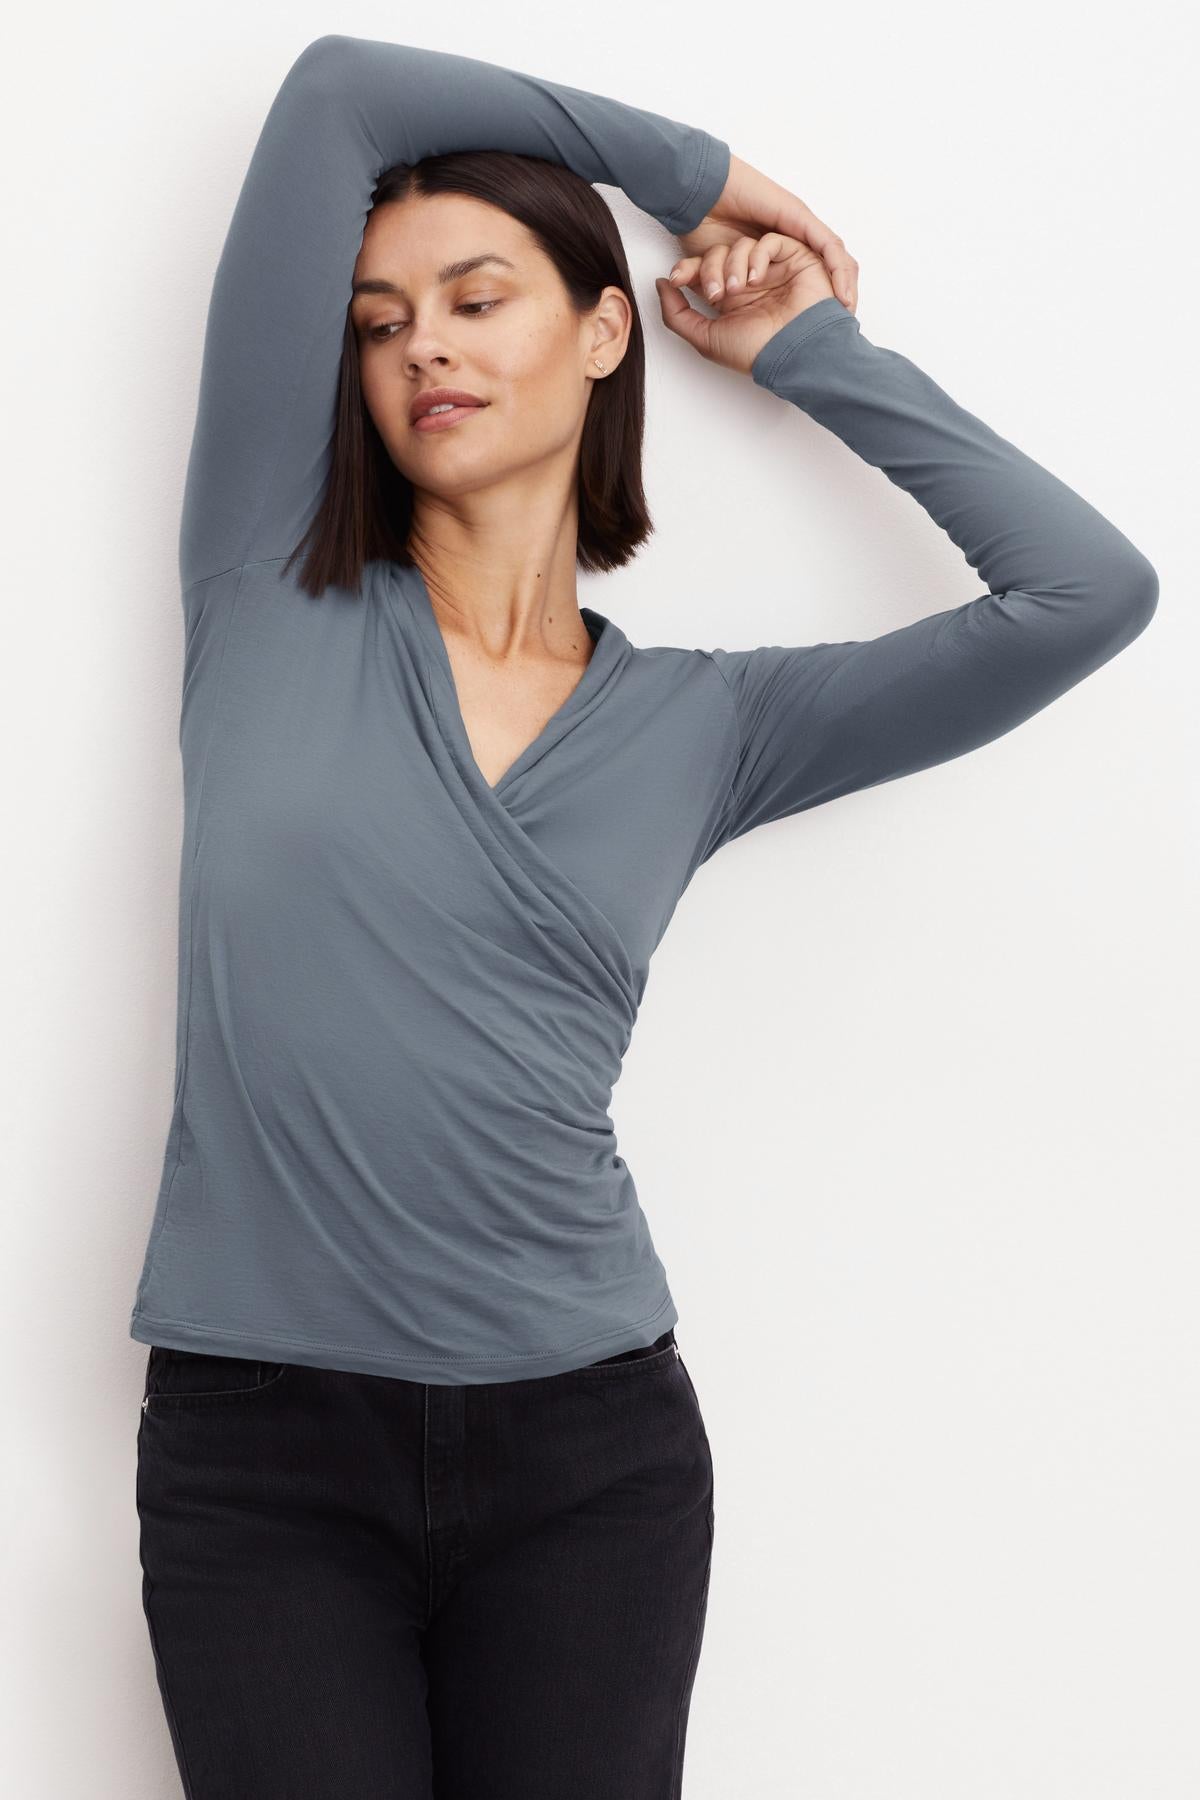   A woman wearing a Velvet by Graham & Spencer MERI WRAP FRONT FITTED TOP, a fitted, grey long-sleeved top with a cross over v-neck. 